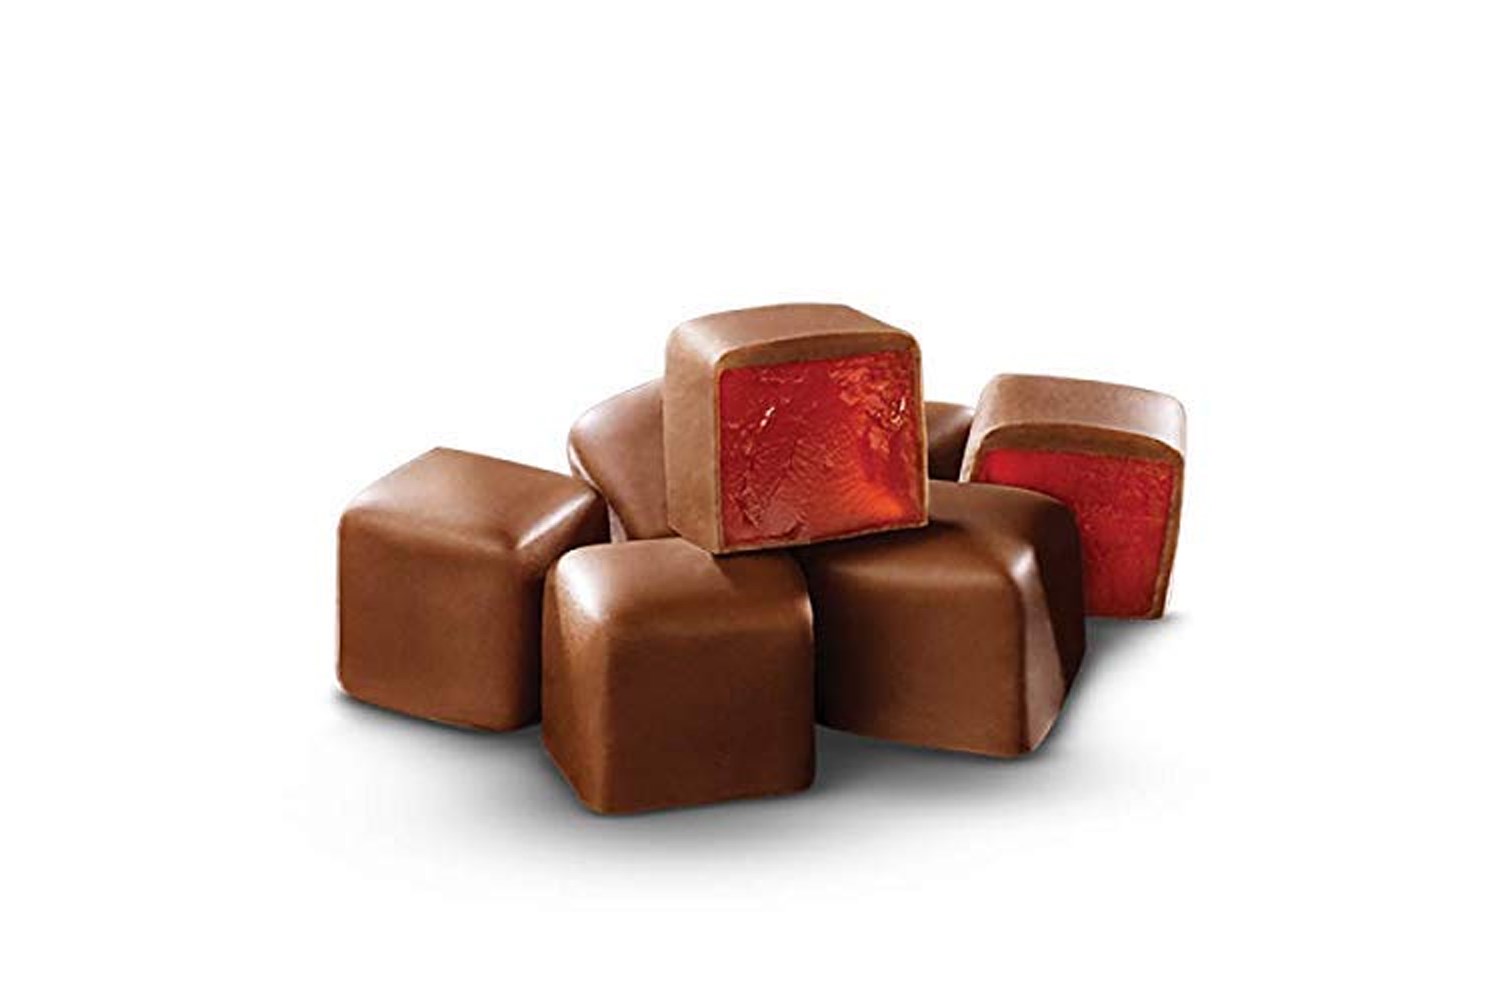 Rose, Mint, Orange and Strawberry Flavored Turkish Delight Lokum Covered  with Chocolate in Gift Box Tin,